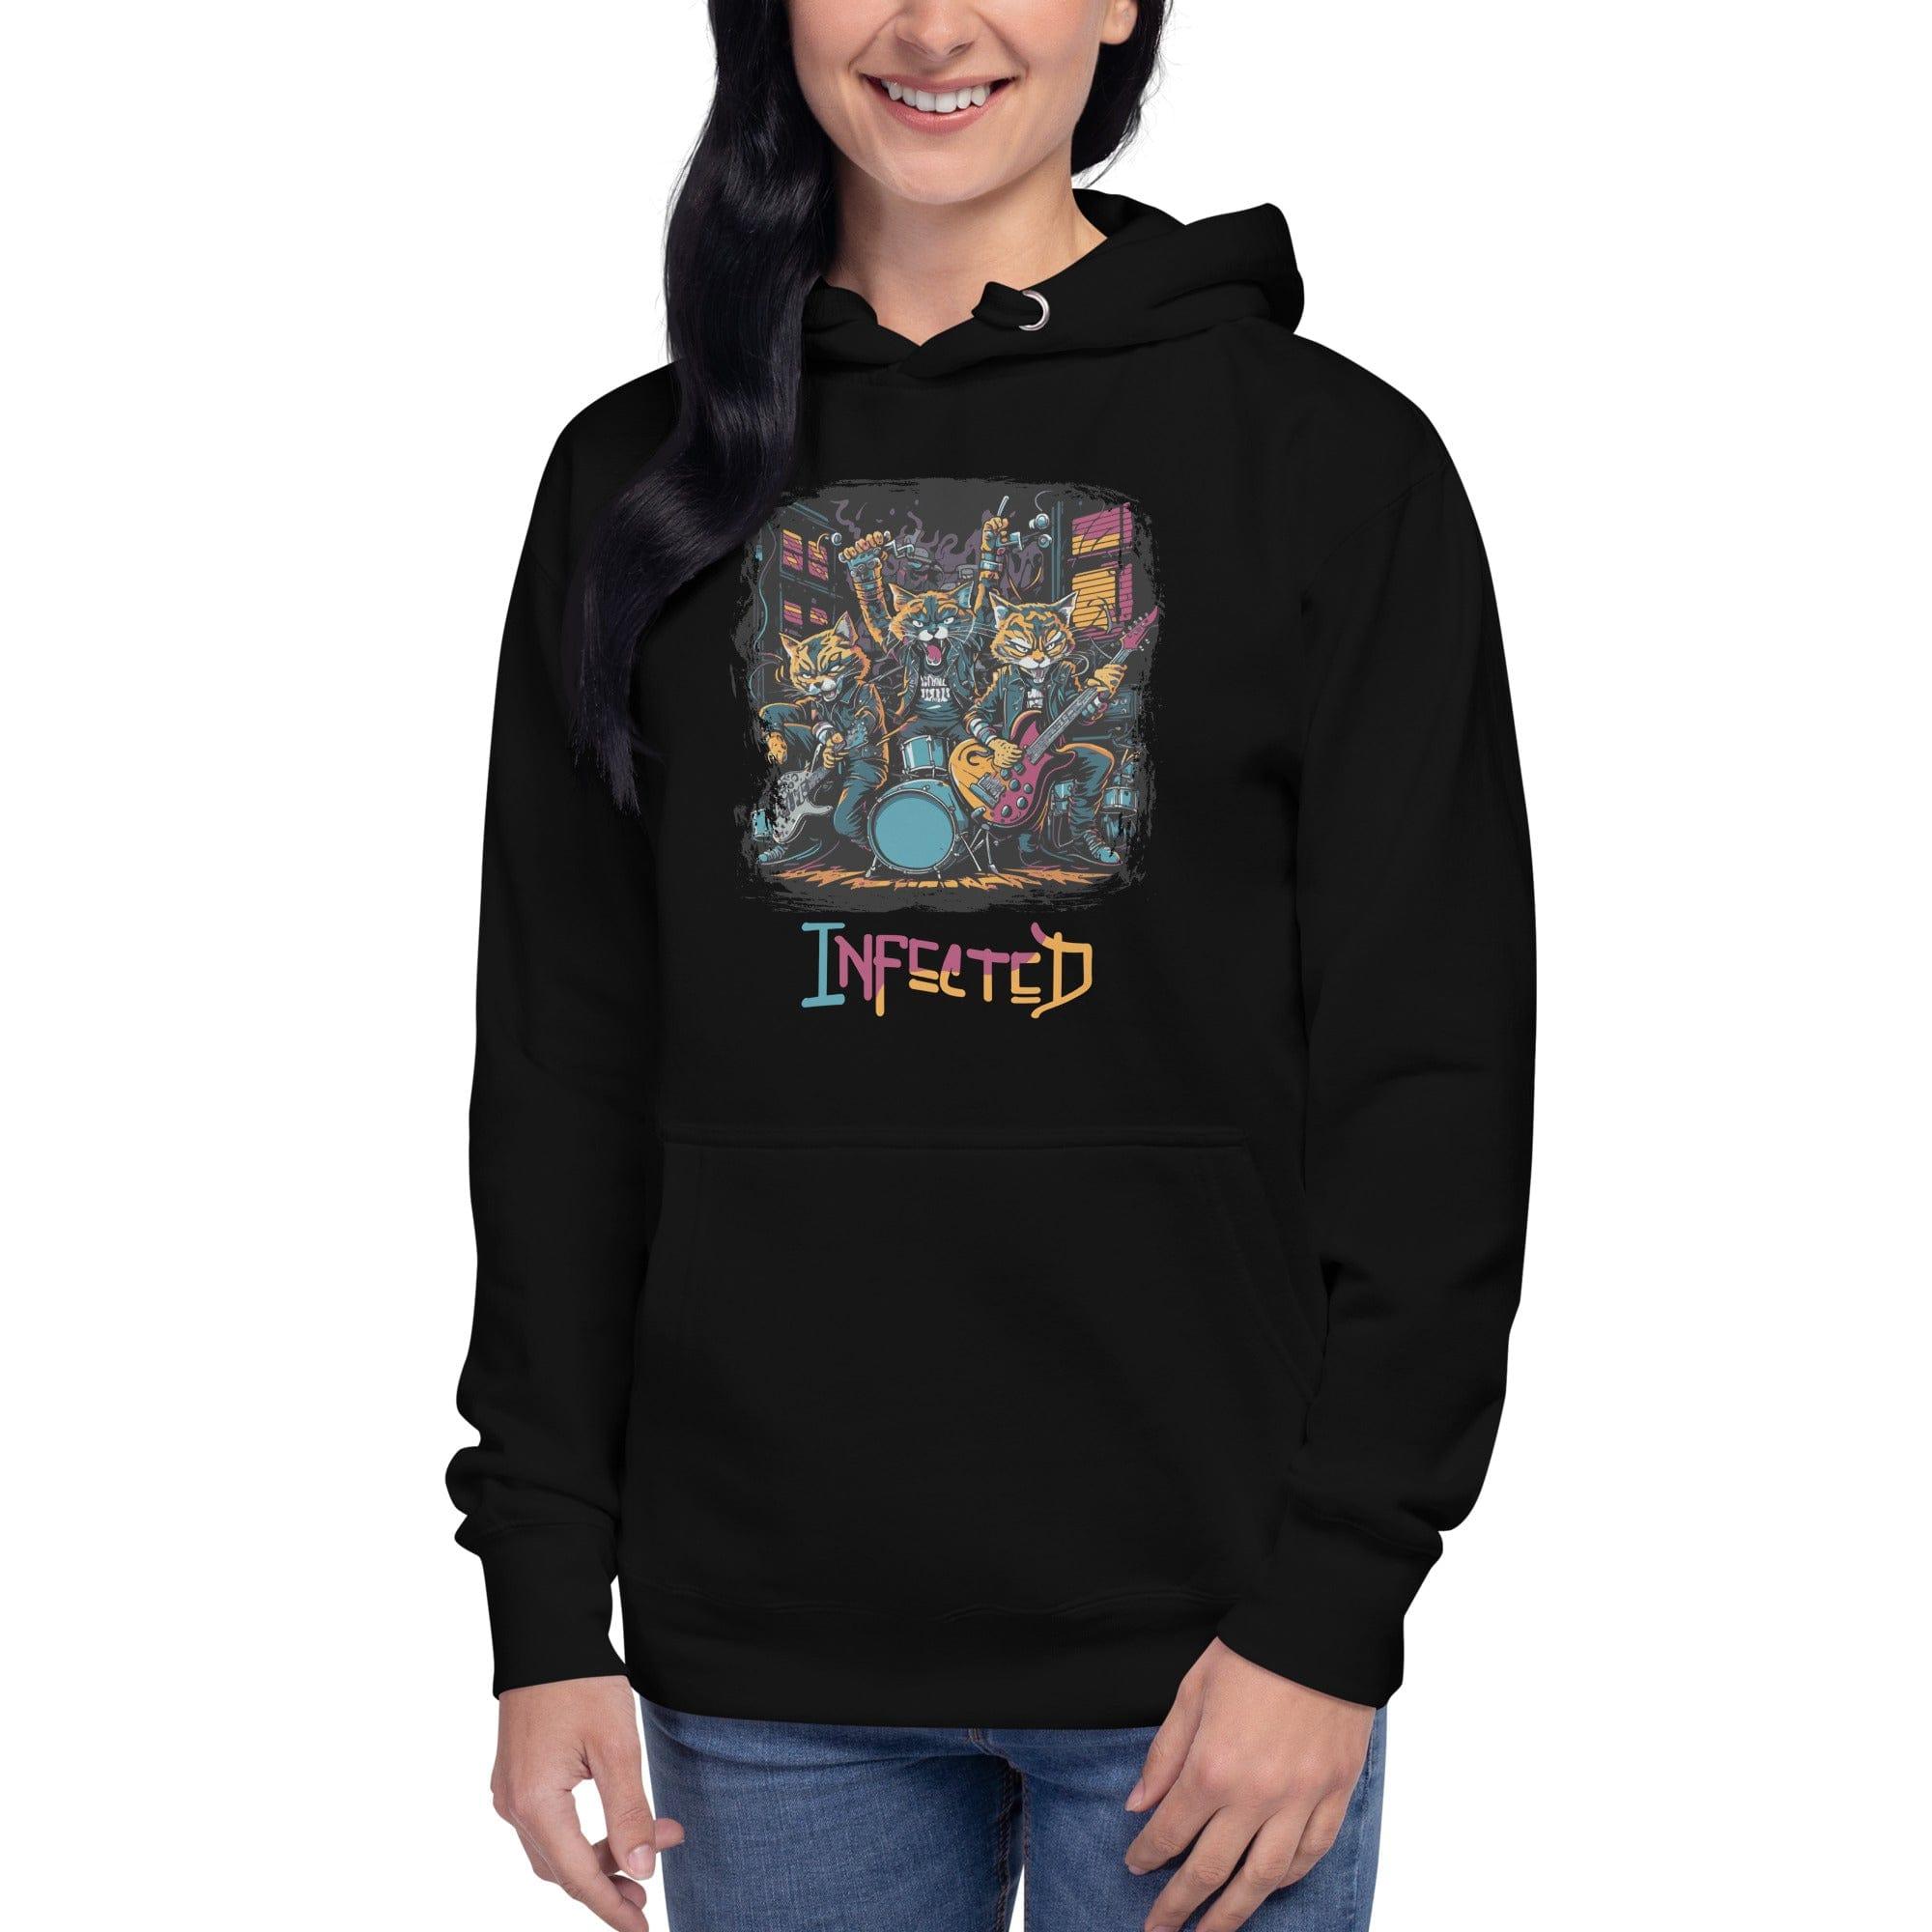 Infected Unisex Hoodie - Beyond T-shirts